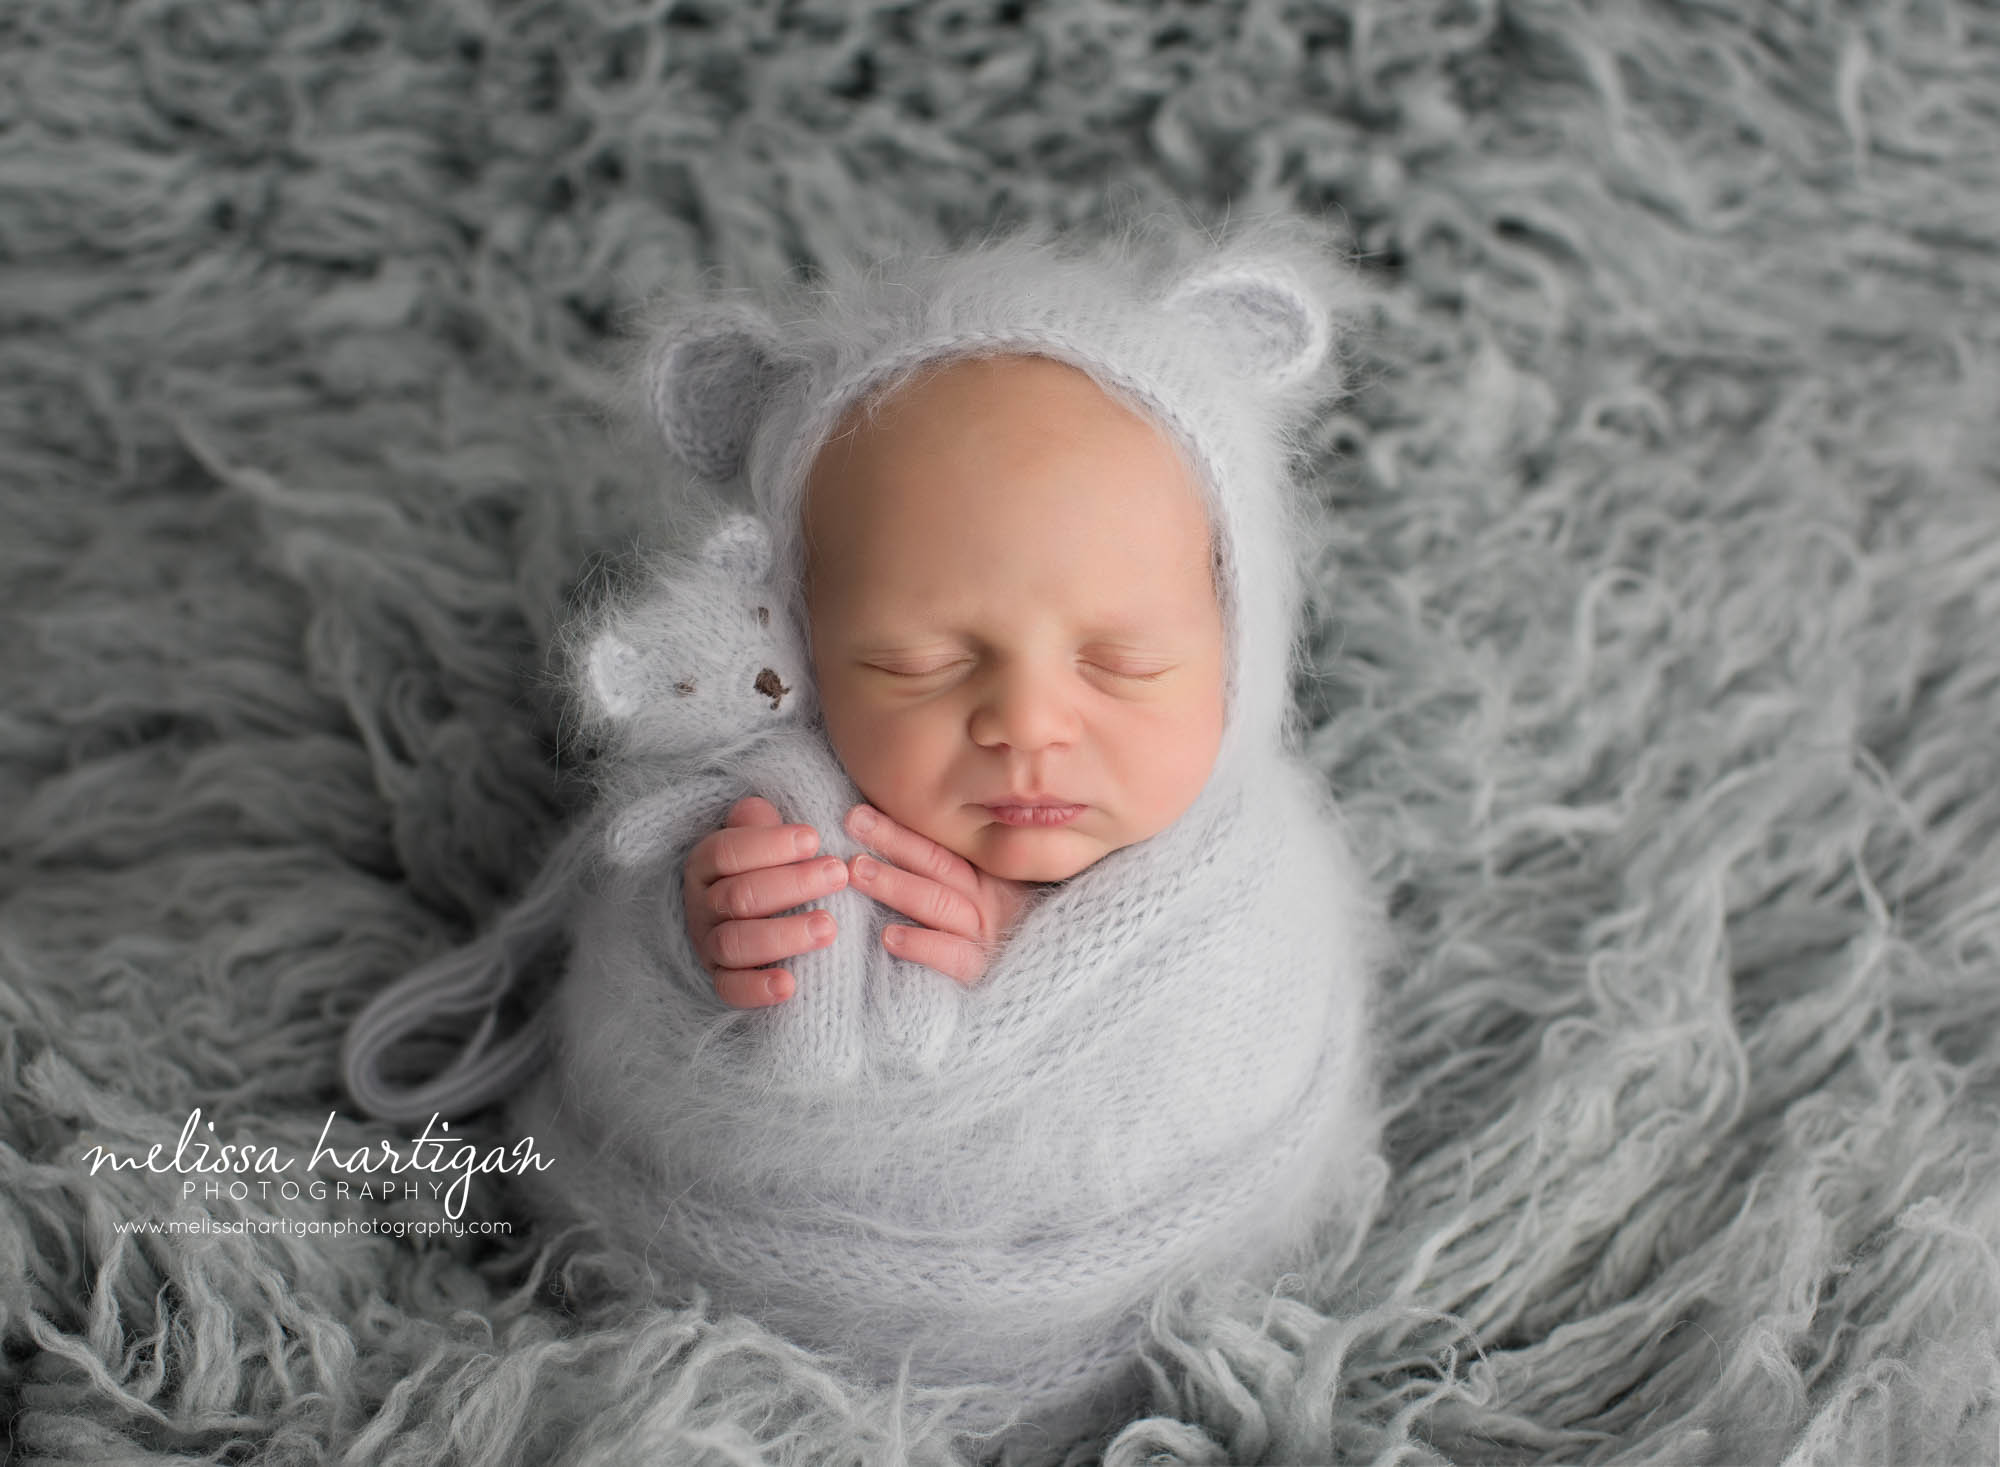 newborn baby boy wrapped in gray knitted wrap with light gray knitted bear bonnet and matching knitted teddy bear angora CT newborn photographer